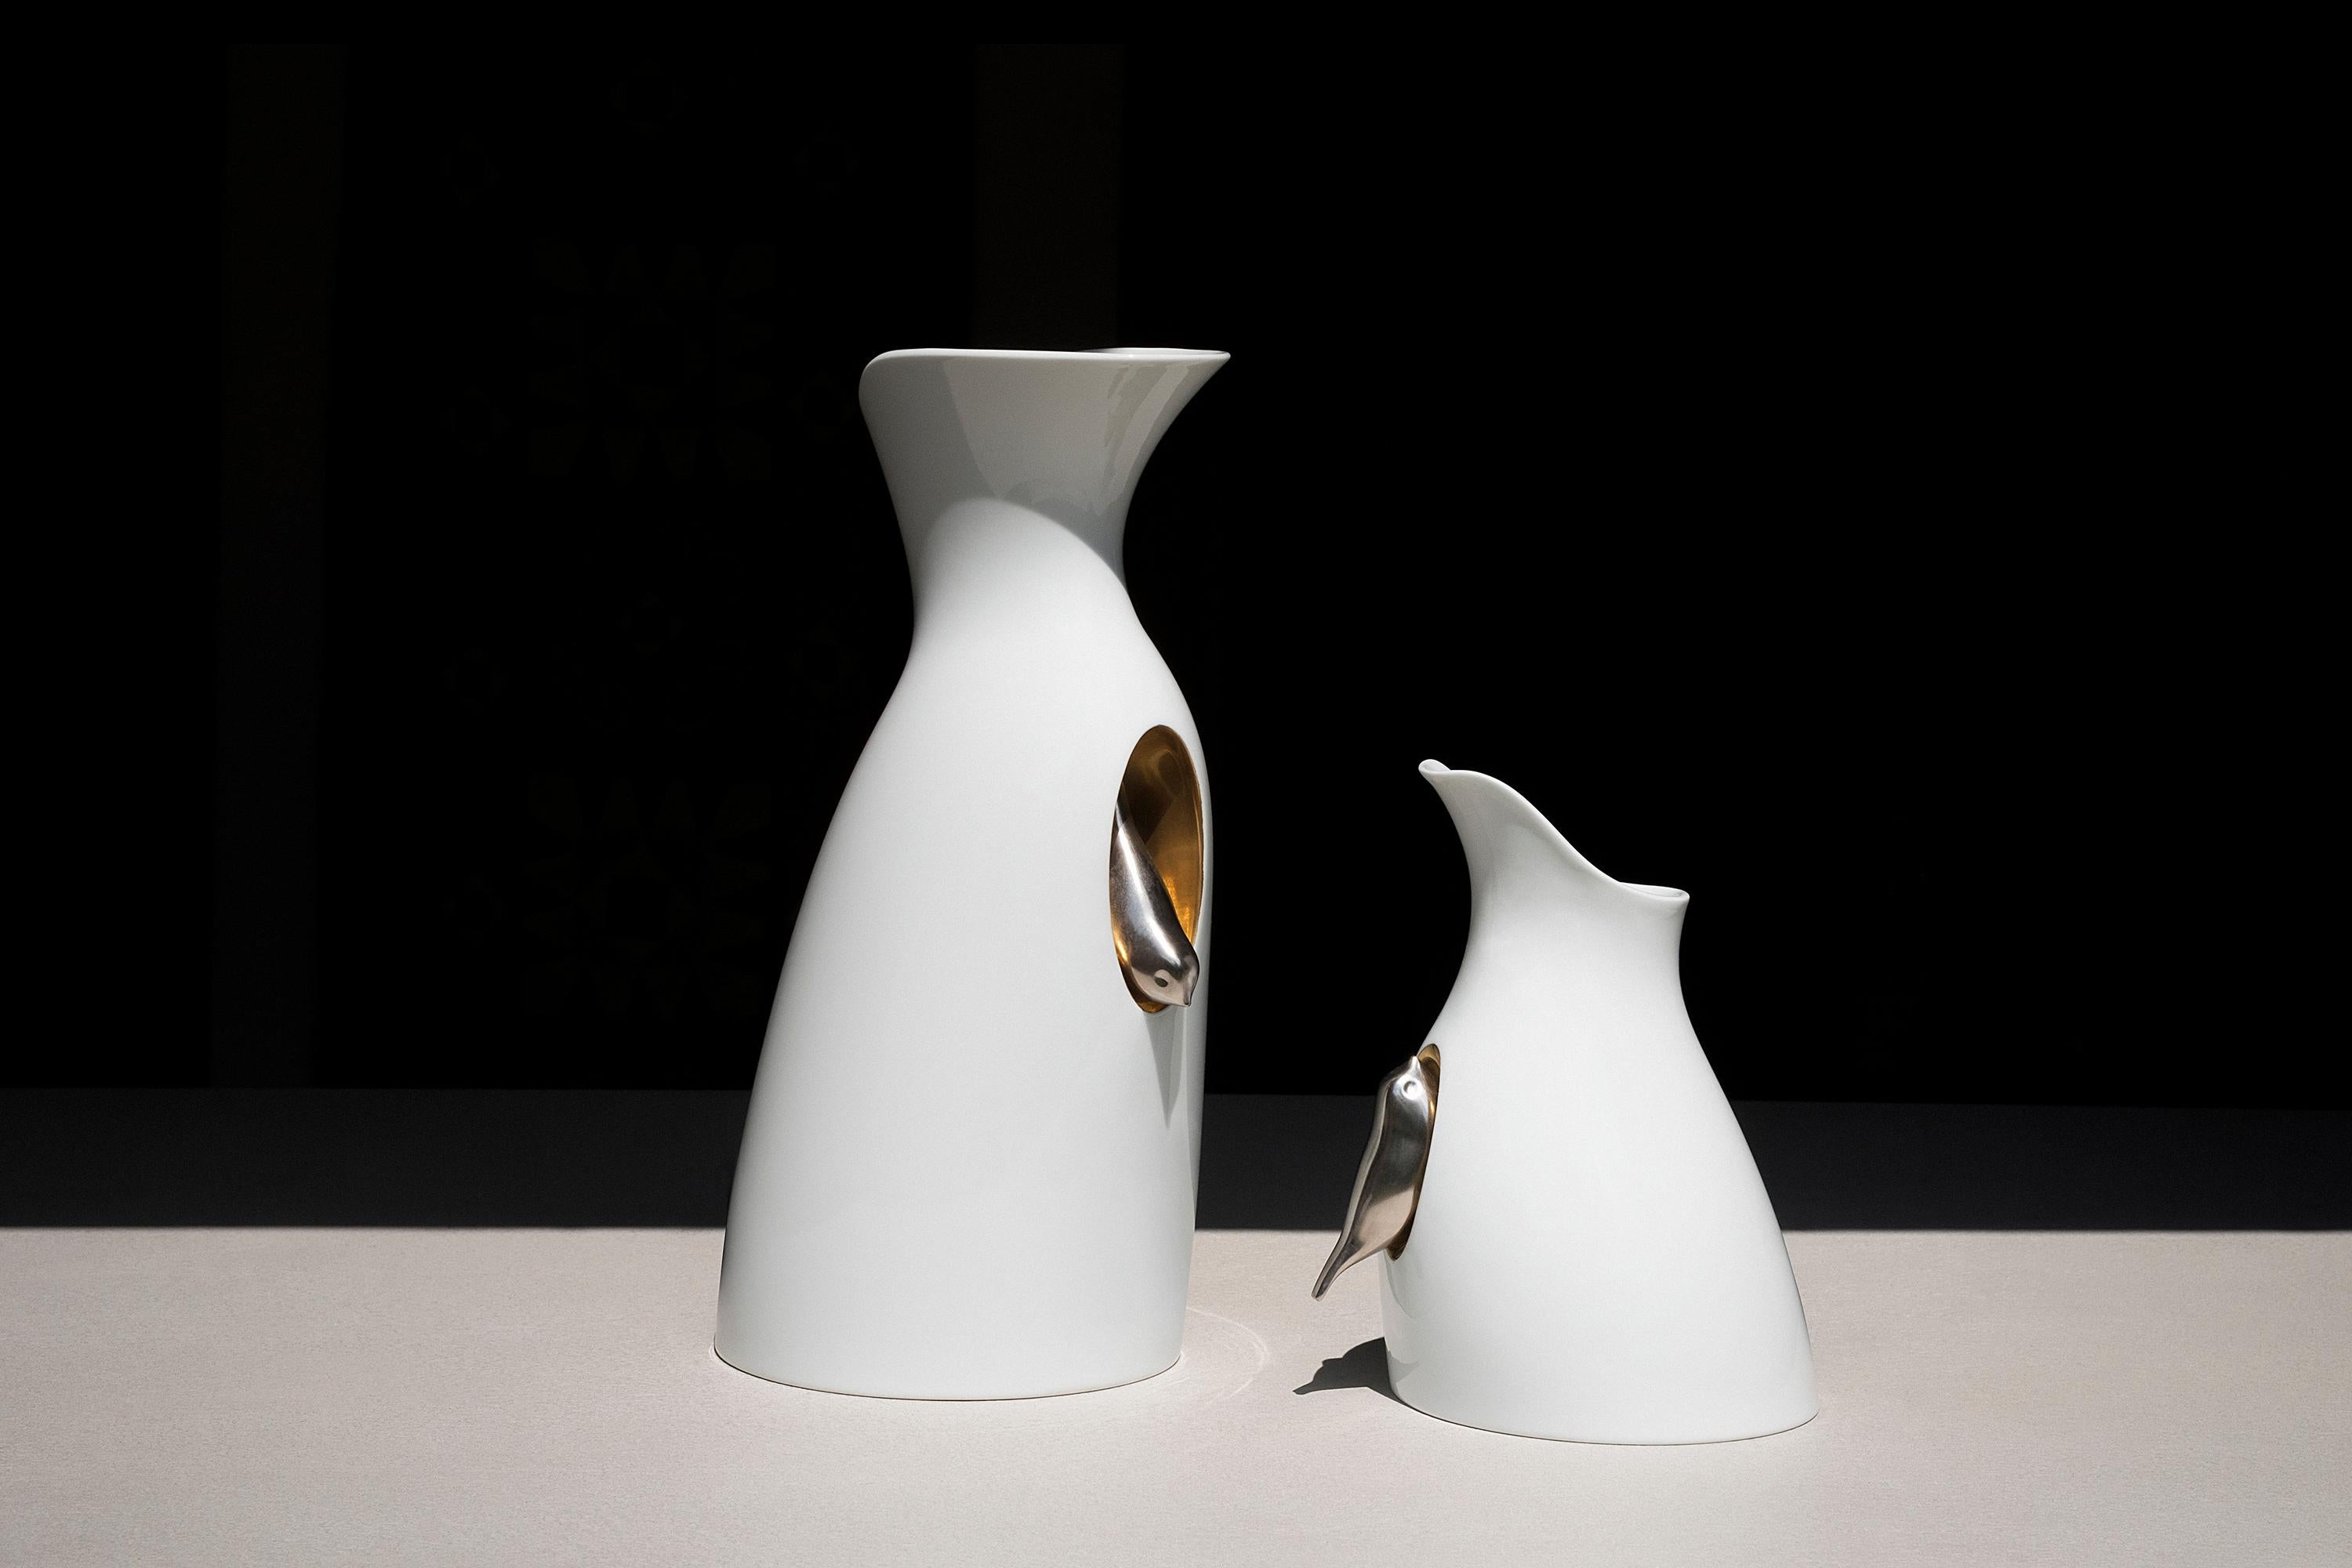 This poetic carafe is designed by GumDesign and handmade in Japan by Risogama for Hands on Design, a traditional pottery. It's characterized by a small silver bird that seems to take refuge in a golden nest carved into the material. The spout for